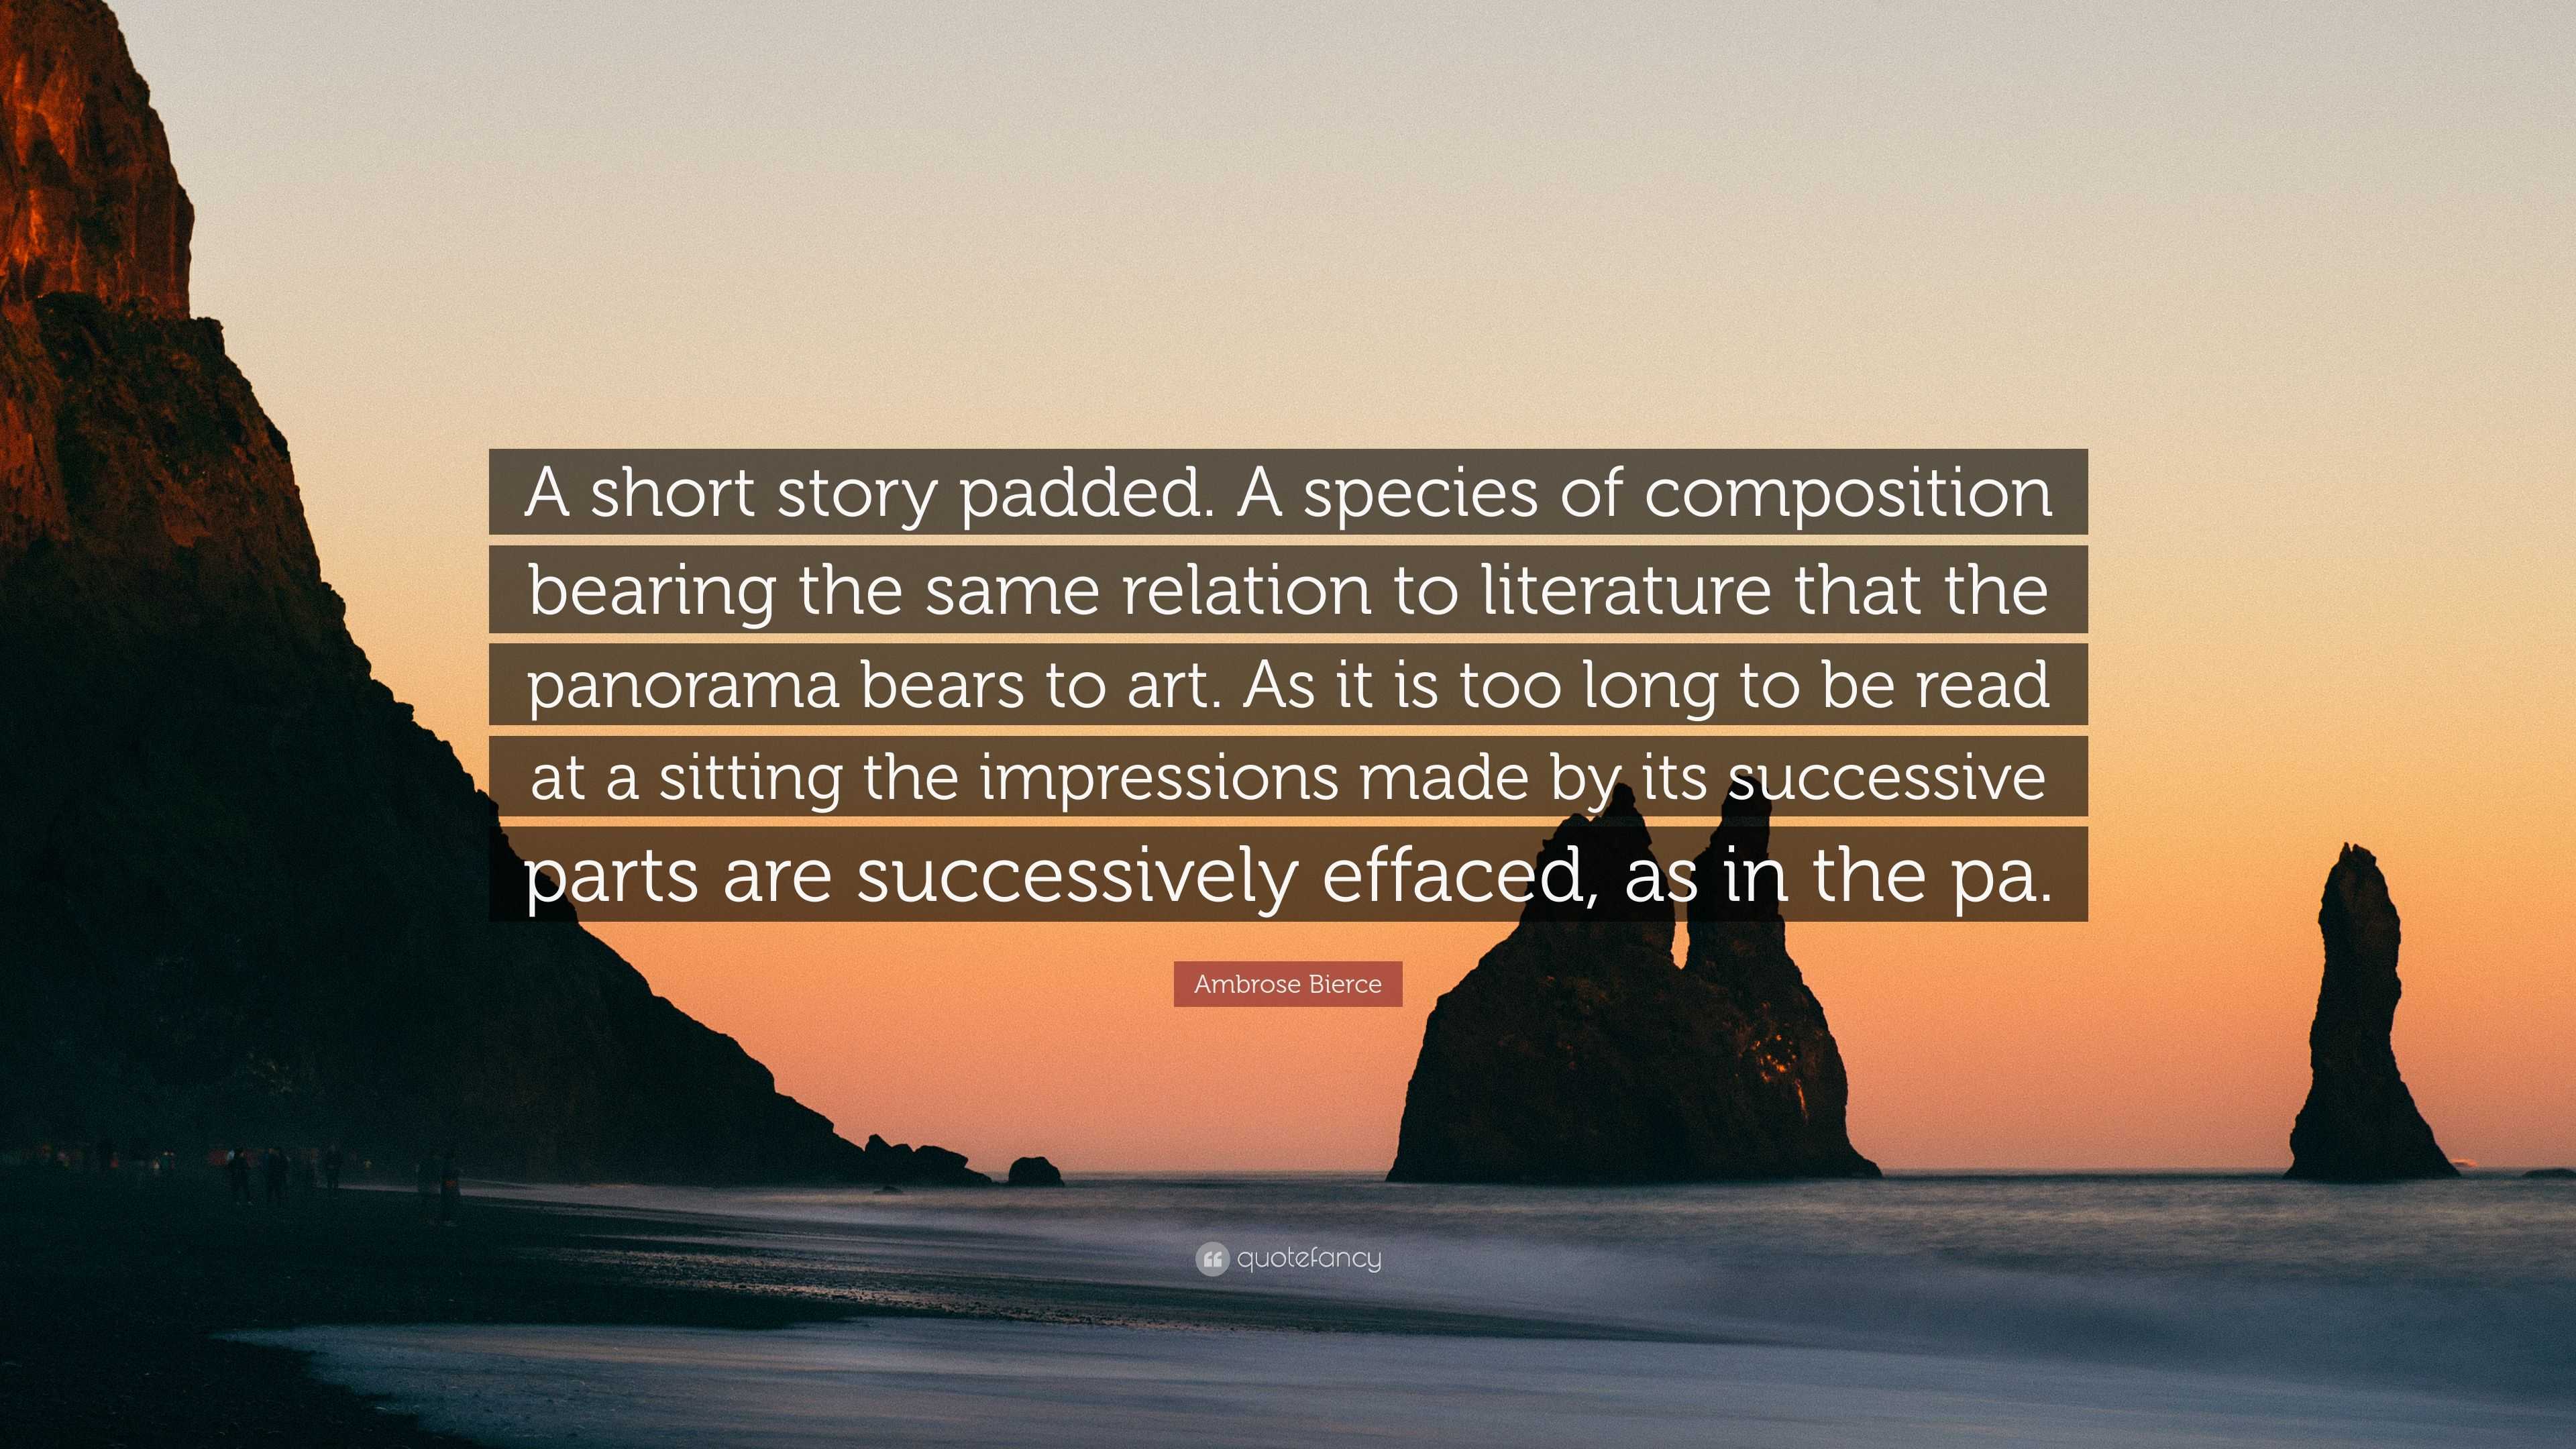 Ambrose Bierce Quote: “A short story padded. A species of